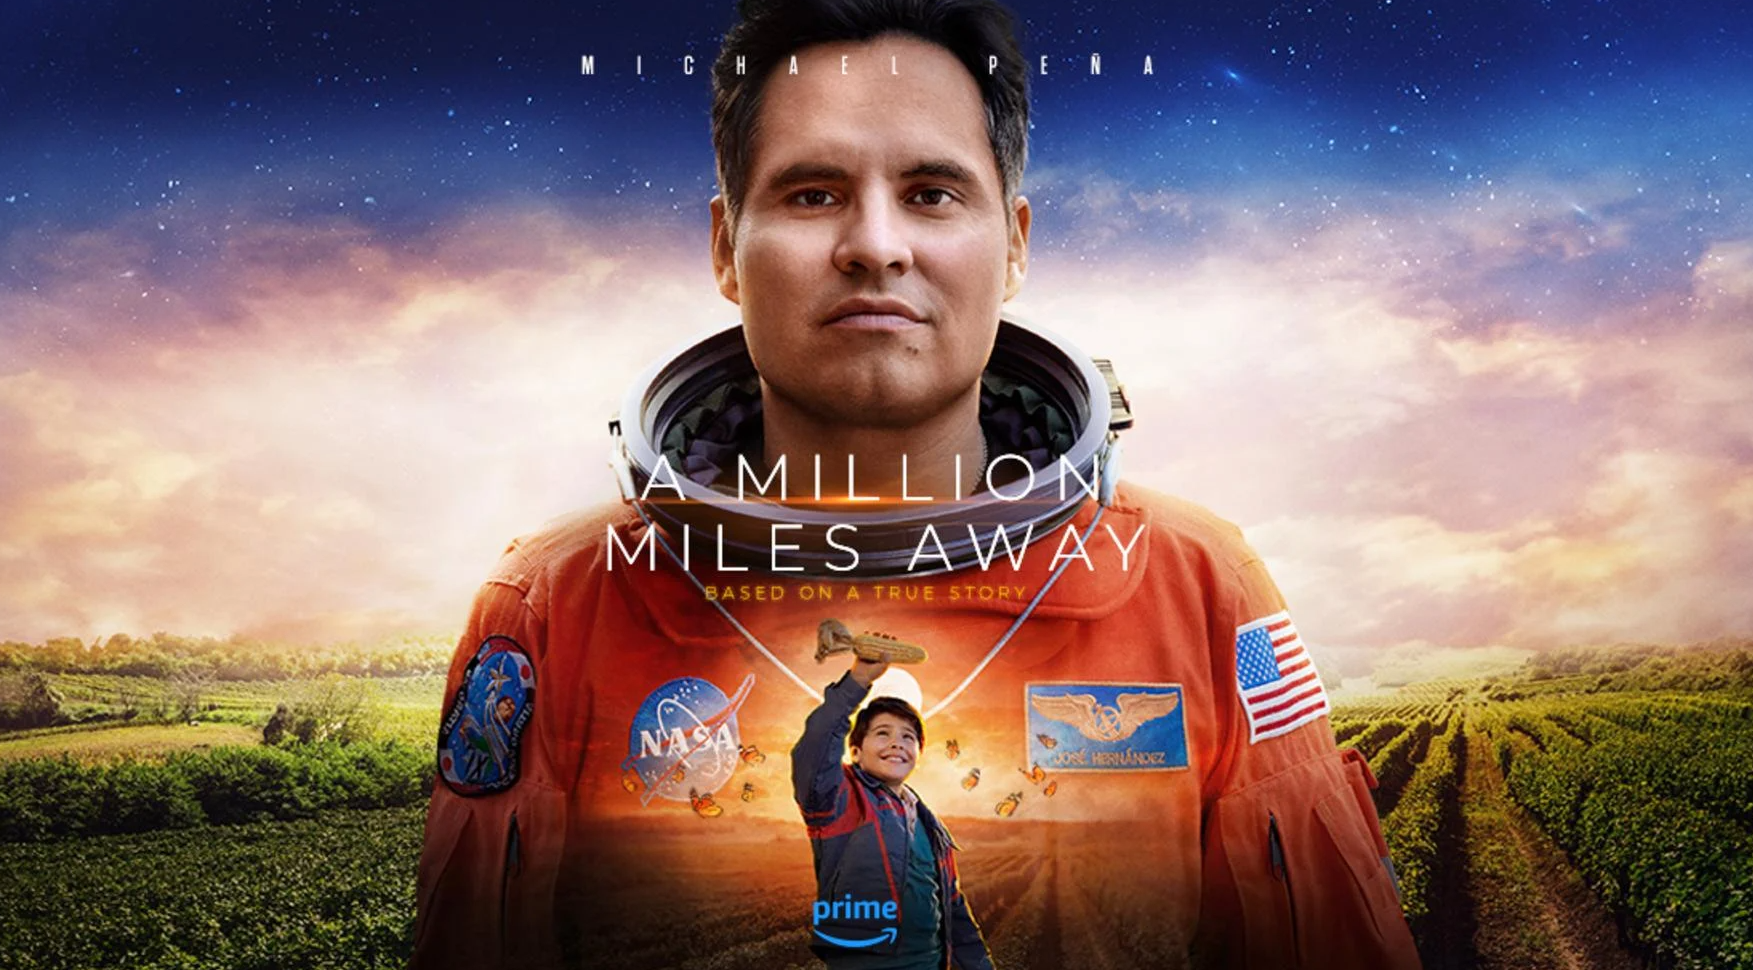 a million miles away movie free for prime members